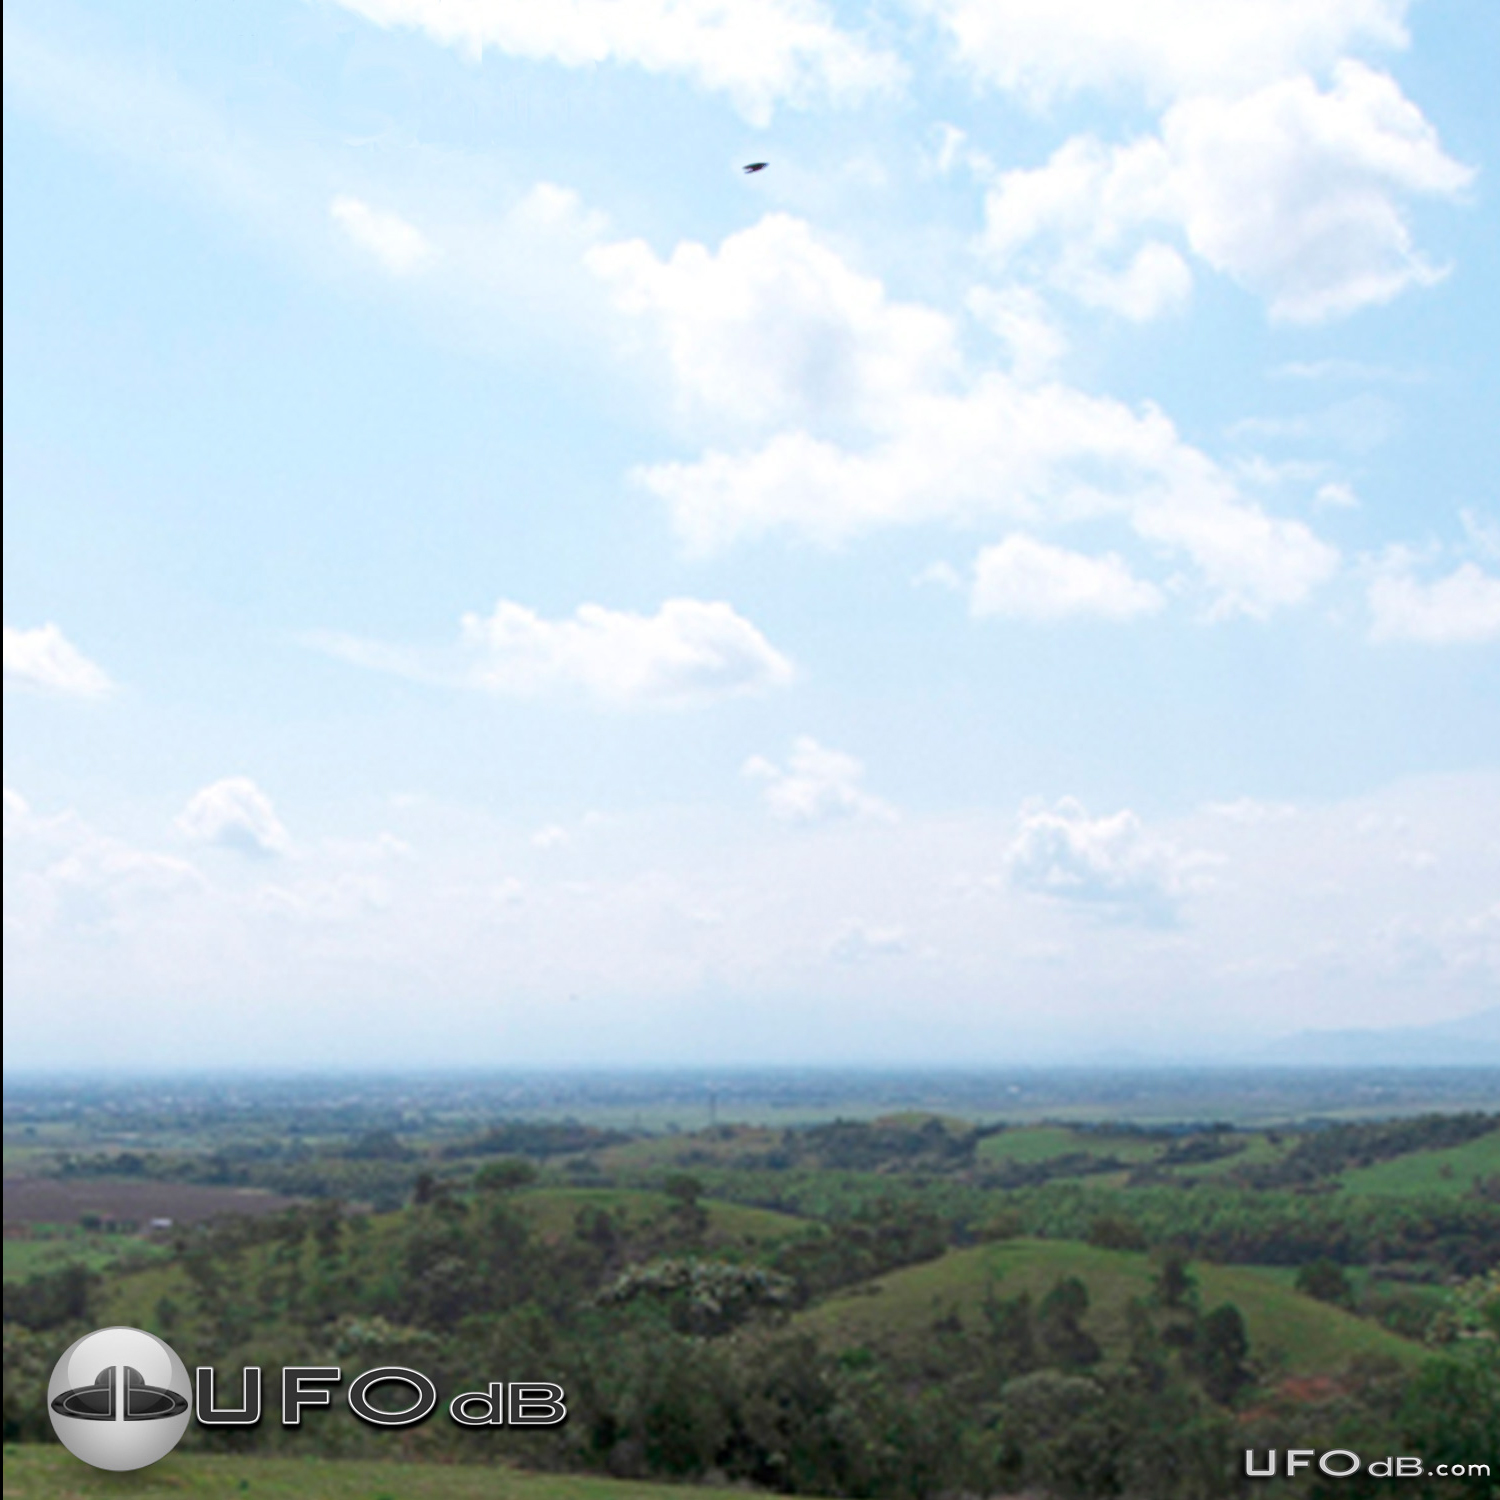 Black Boomerang UFO in the Mountains in Cali, Colombia | January 2011 UFO Picture #245-1